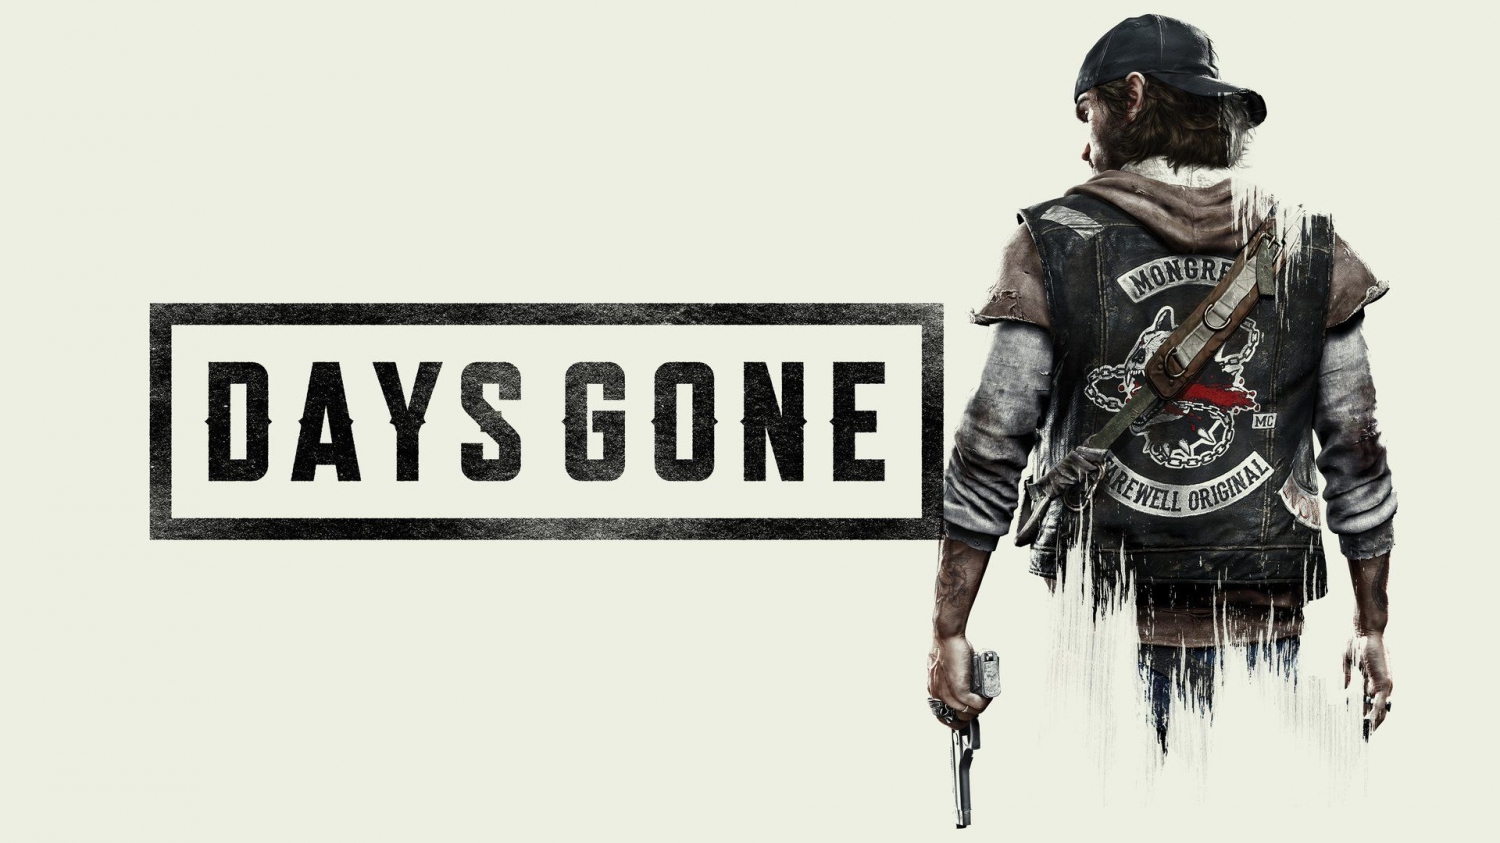 Why did Sony deny Days Gone 2? High budget was likely a big reason